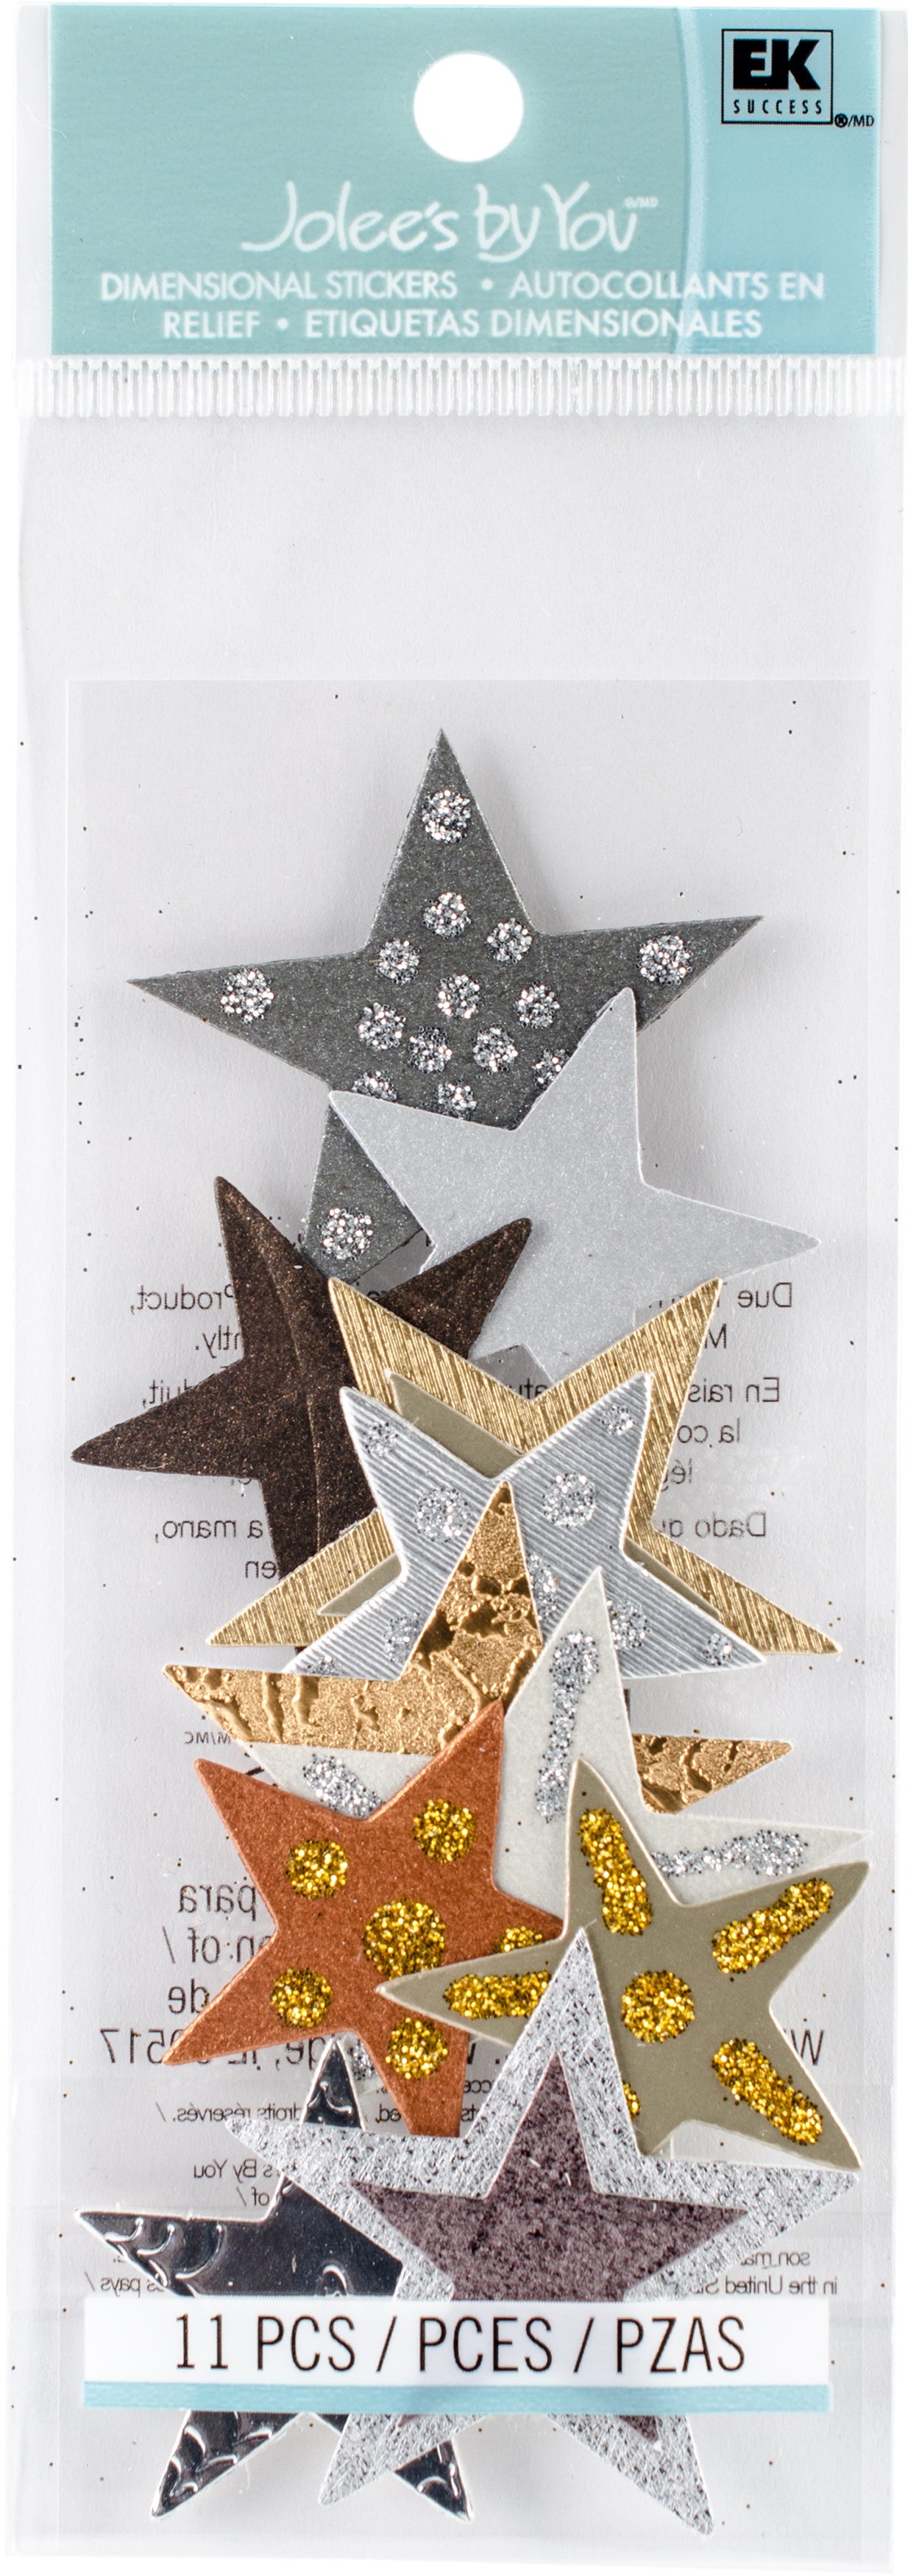 Jolee's By You Dimensional Stickers-Gold & Brown Stars